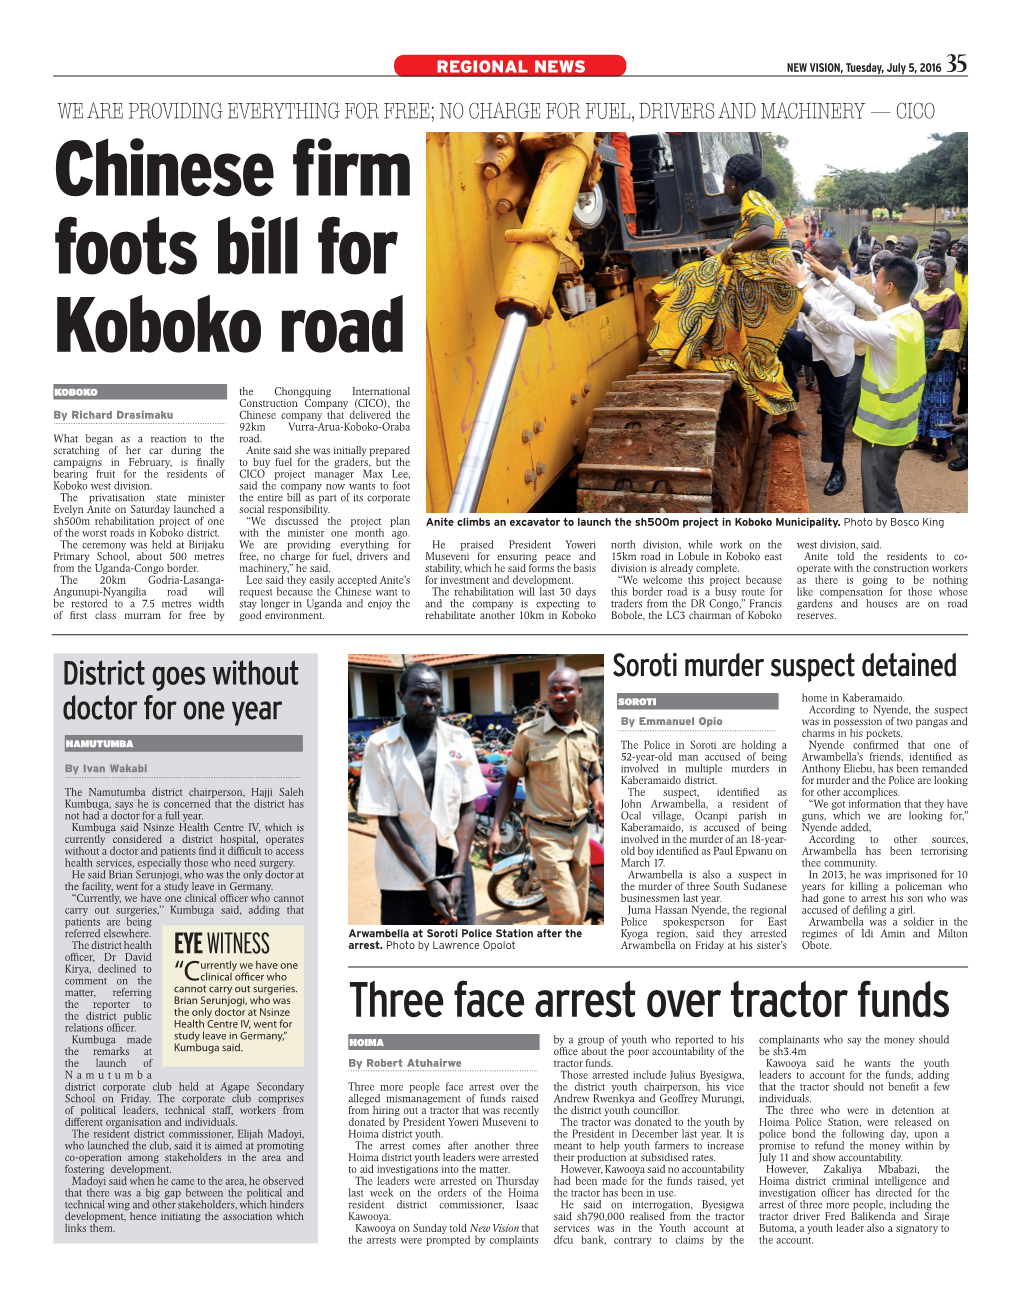 Chinese Firm Foots Bill for Koboko Road